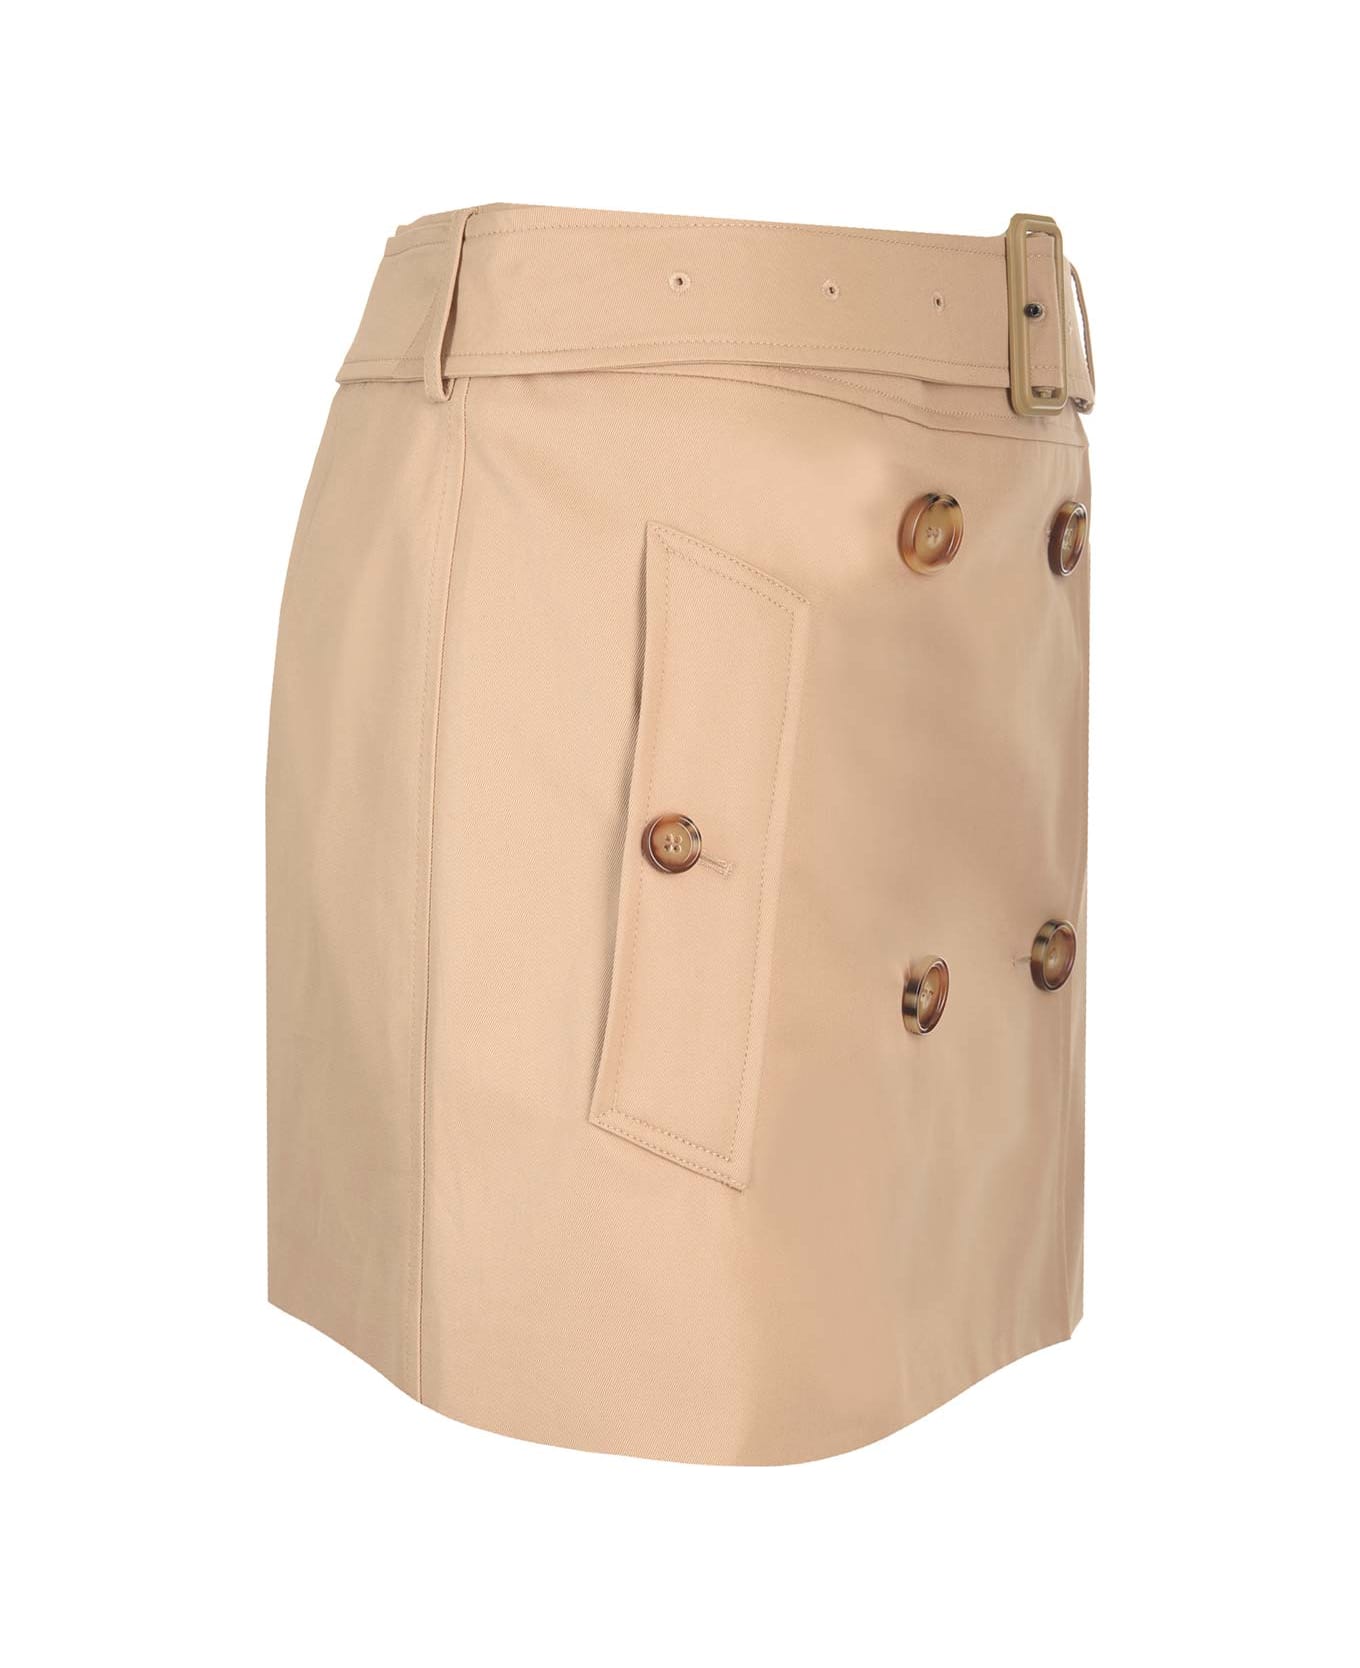 Burberry Trench-style Mini Skirt - Beige